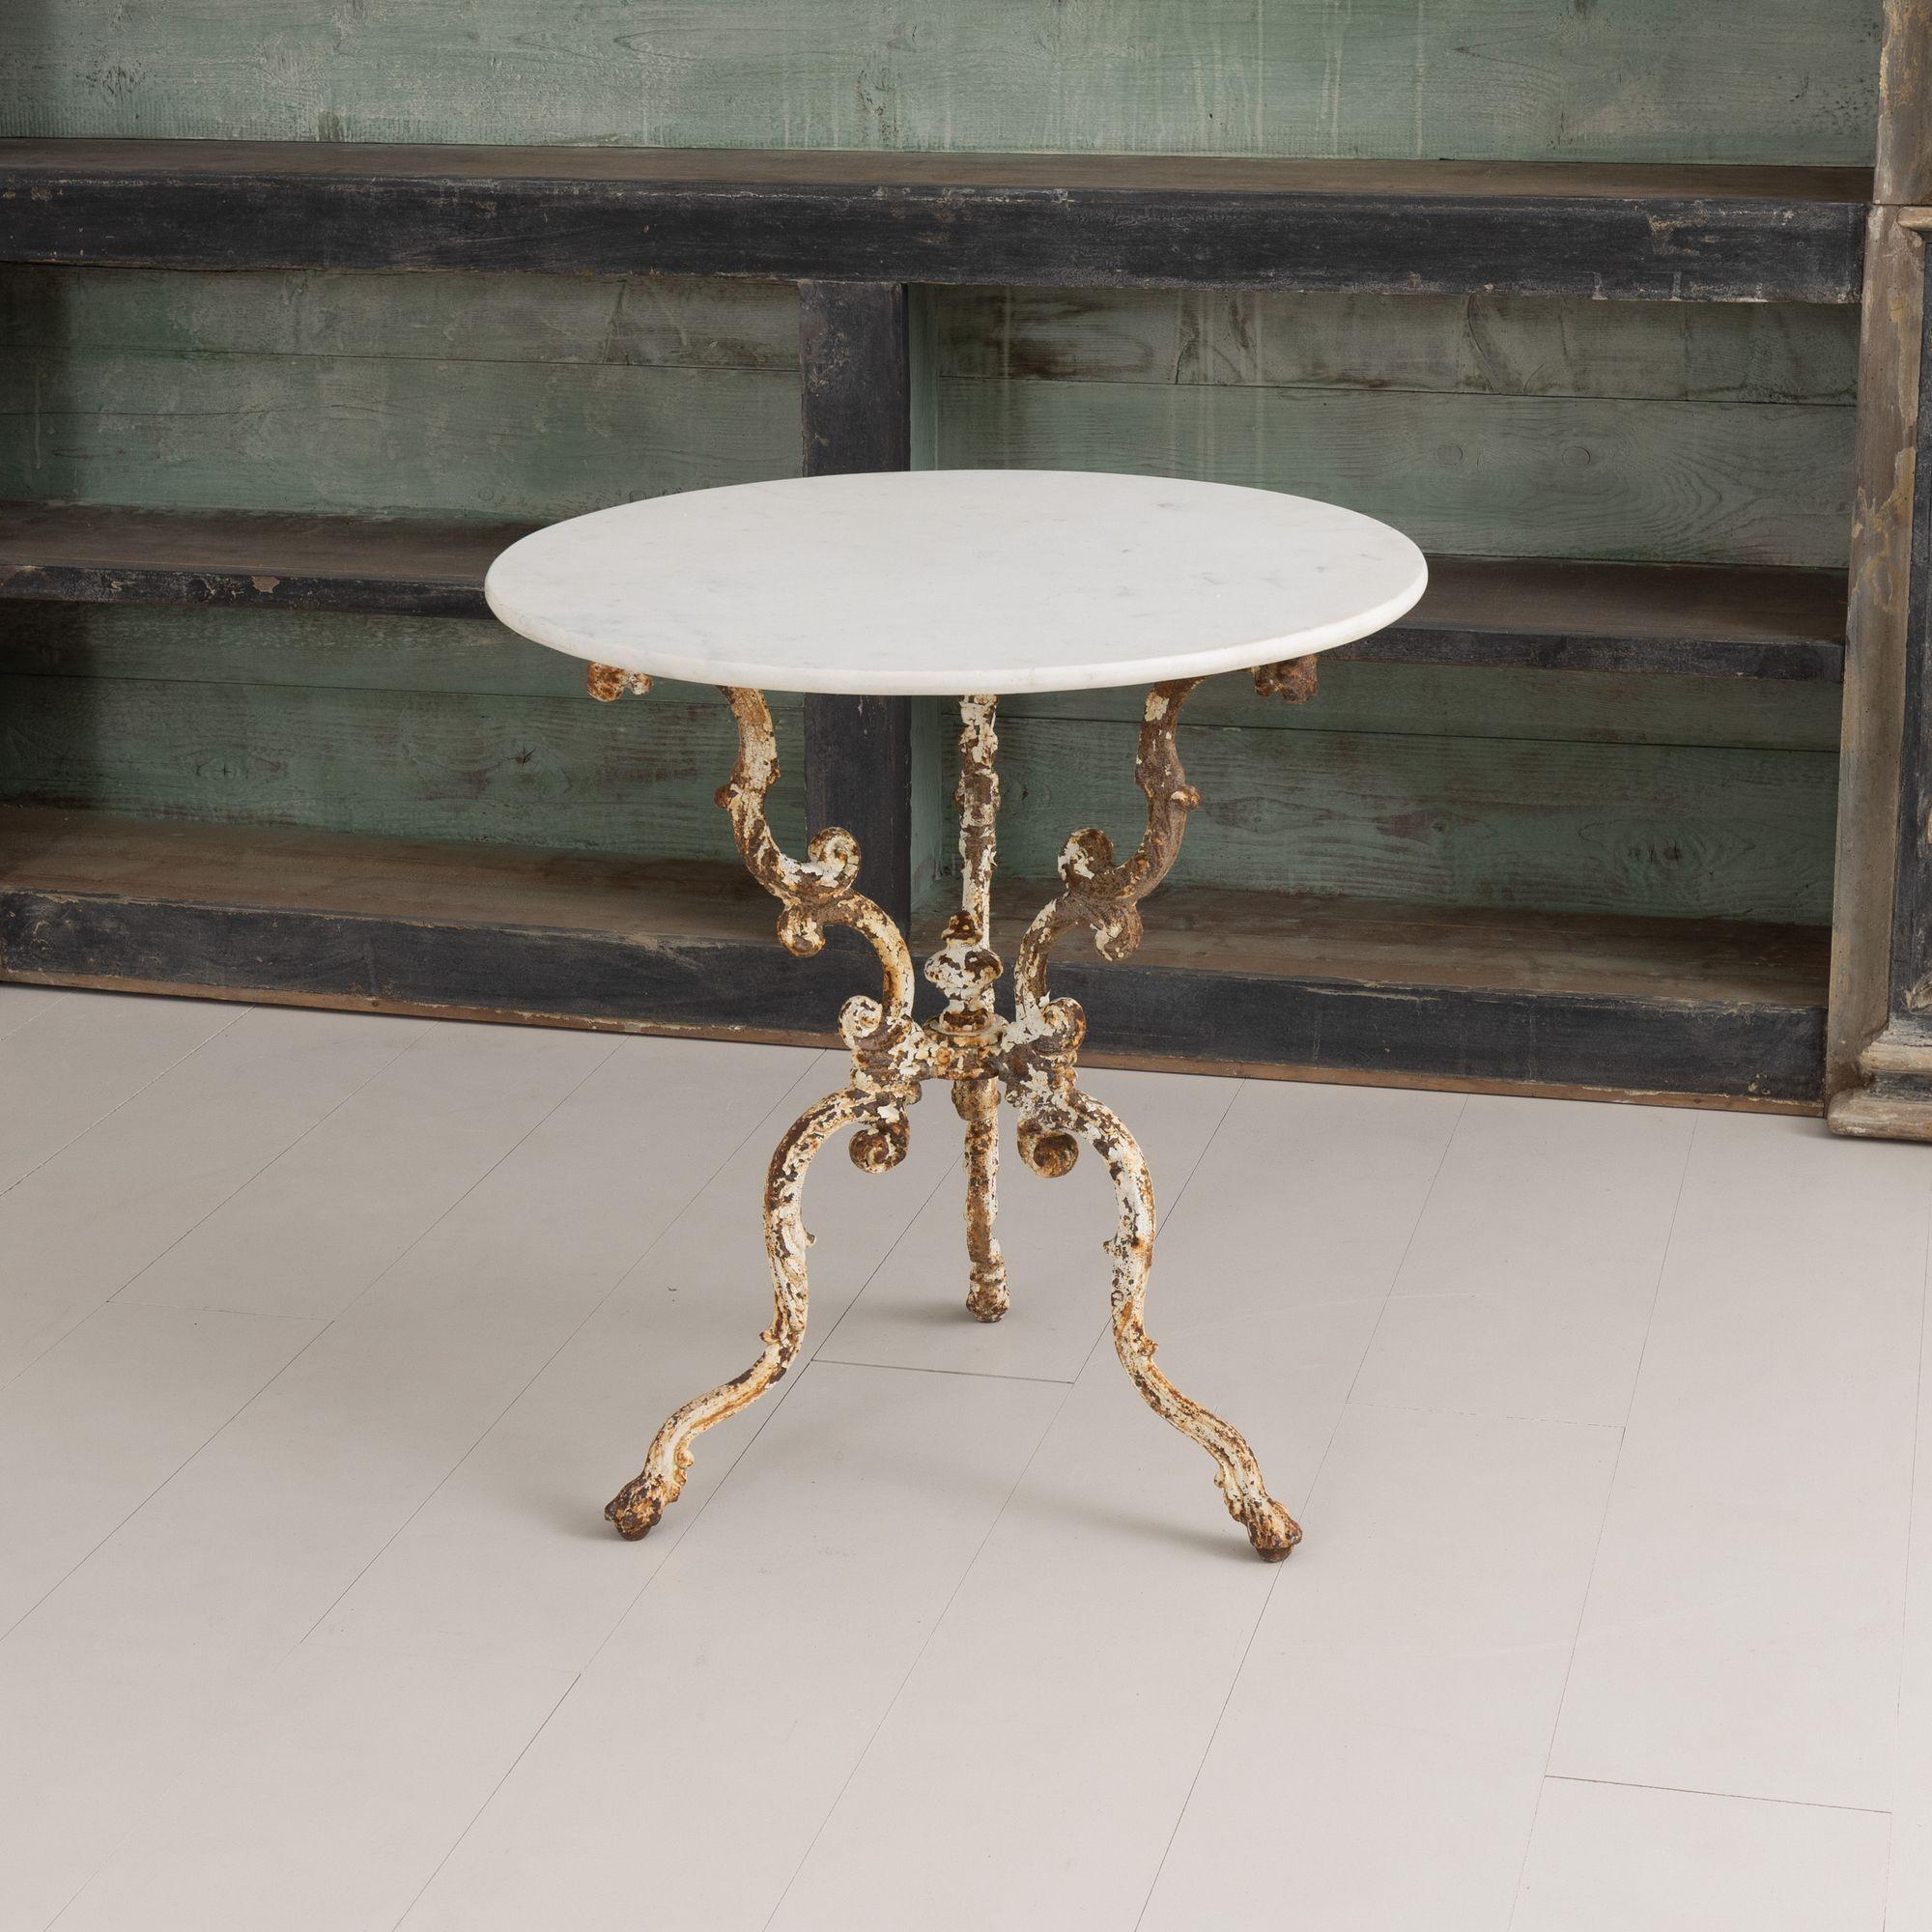 19th Century 19th C. French Cast Iron Gueridon Table with Original Paint and Carrara Marble